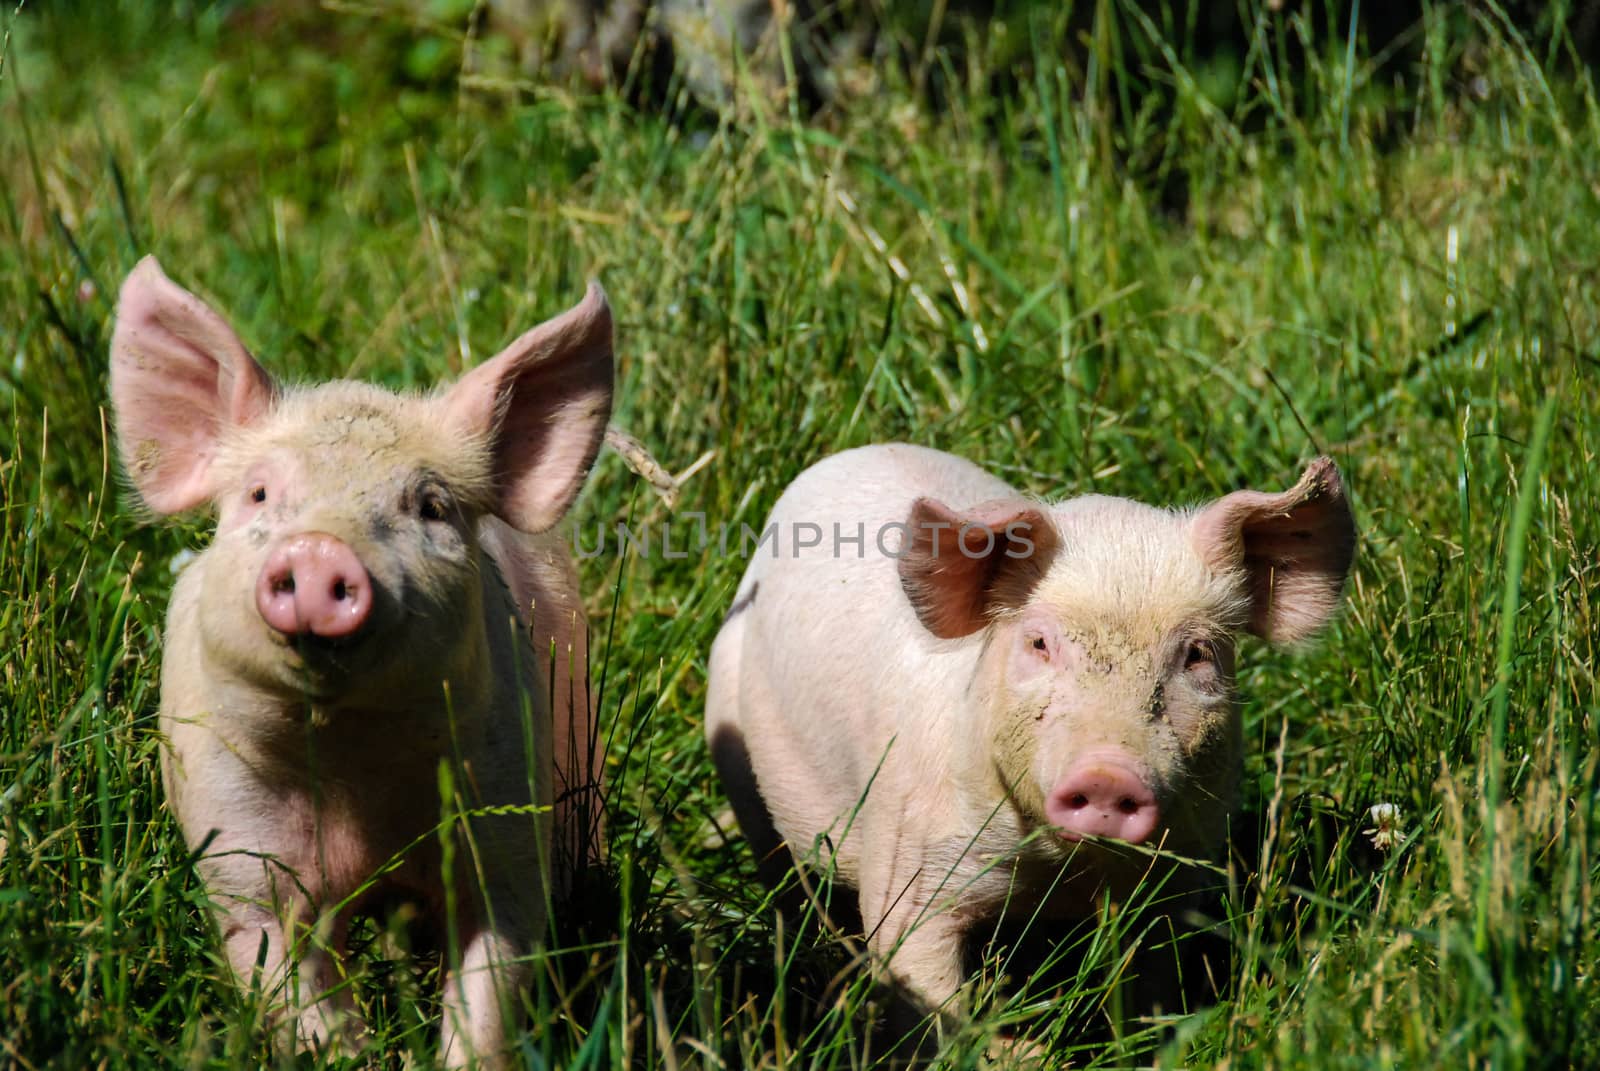 Free pigs in a green meadow